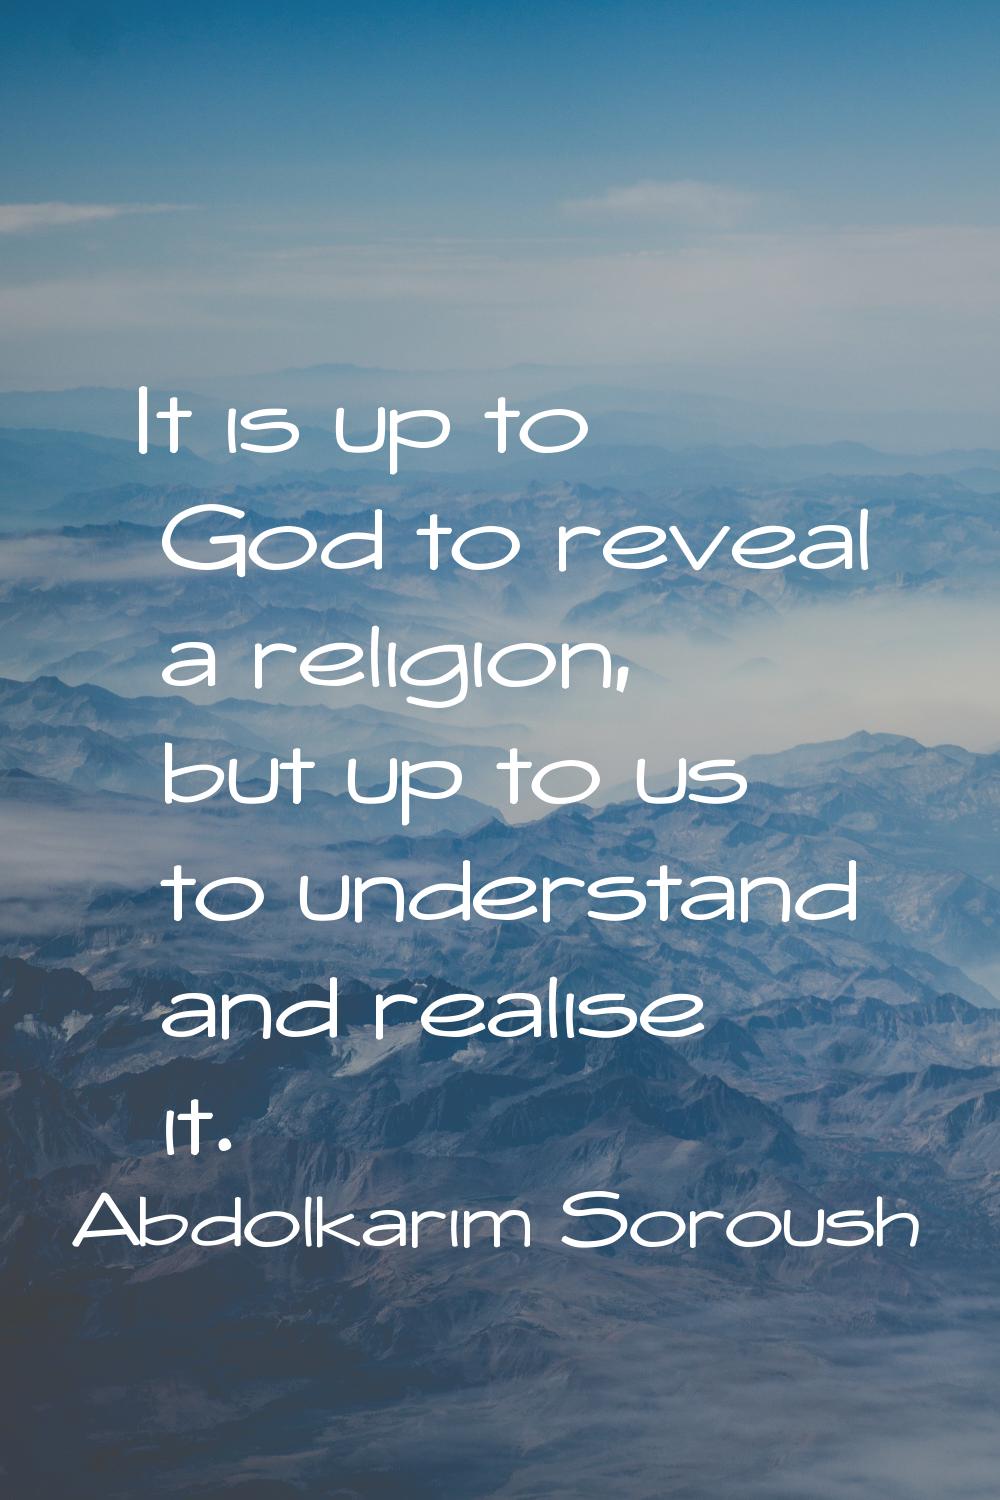 It is up to God to reveal a religion, but up to us to understand and realise it.